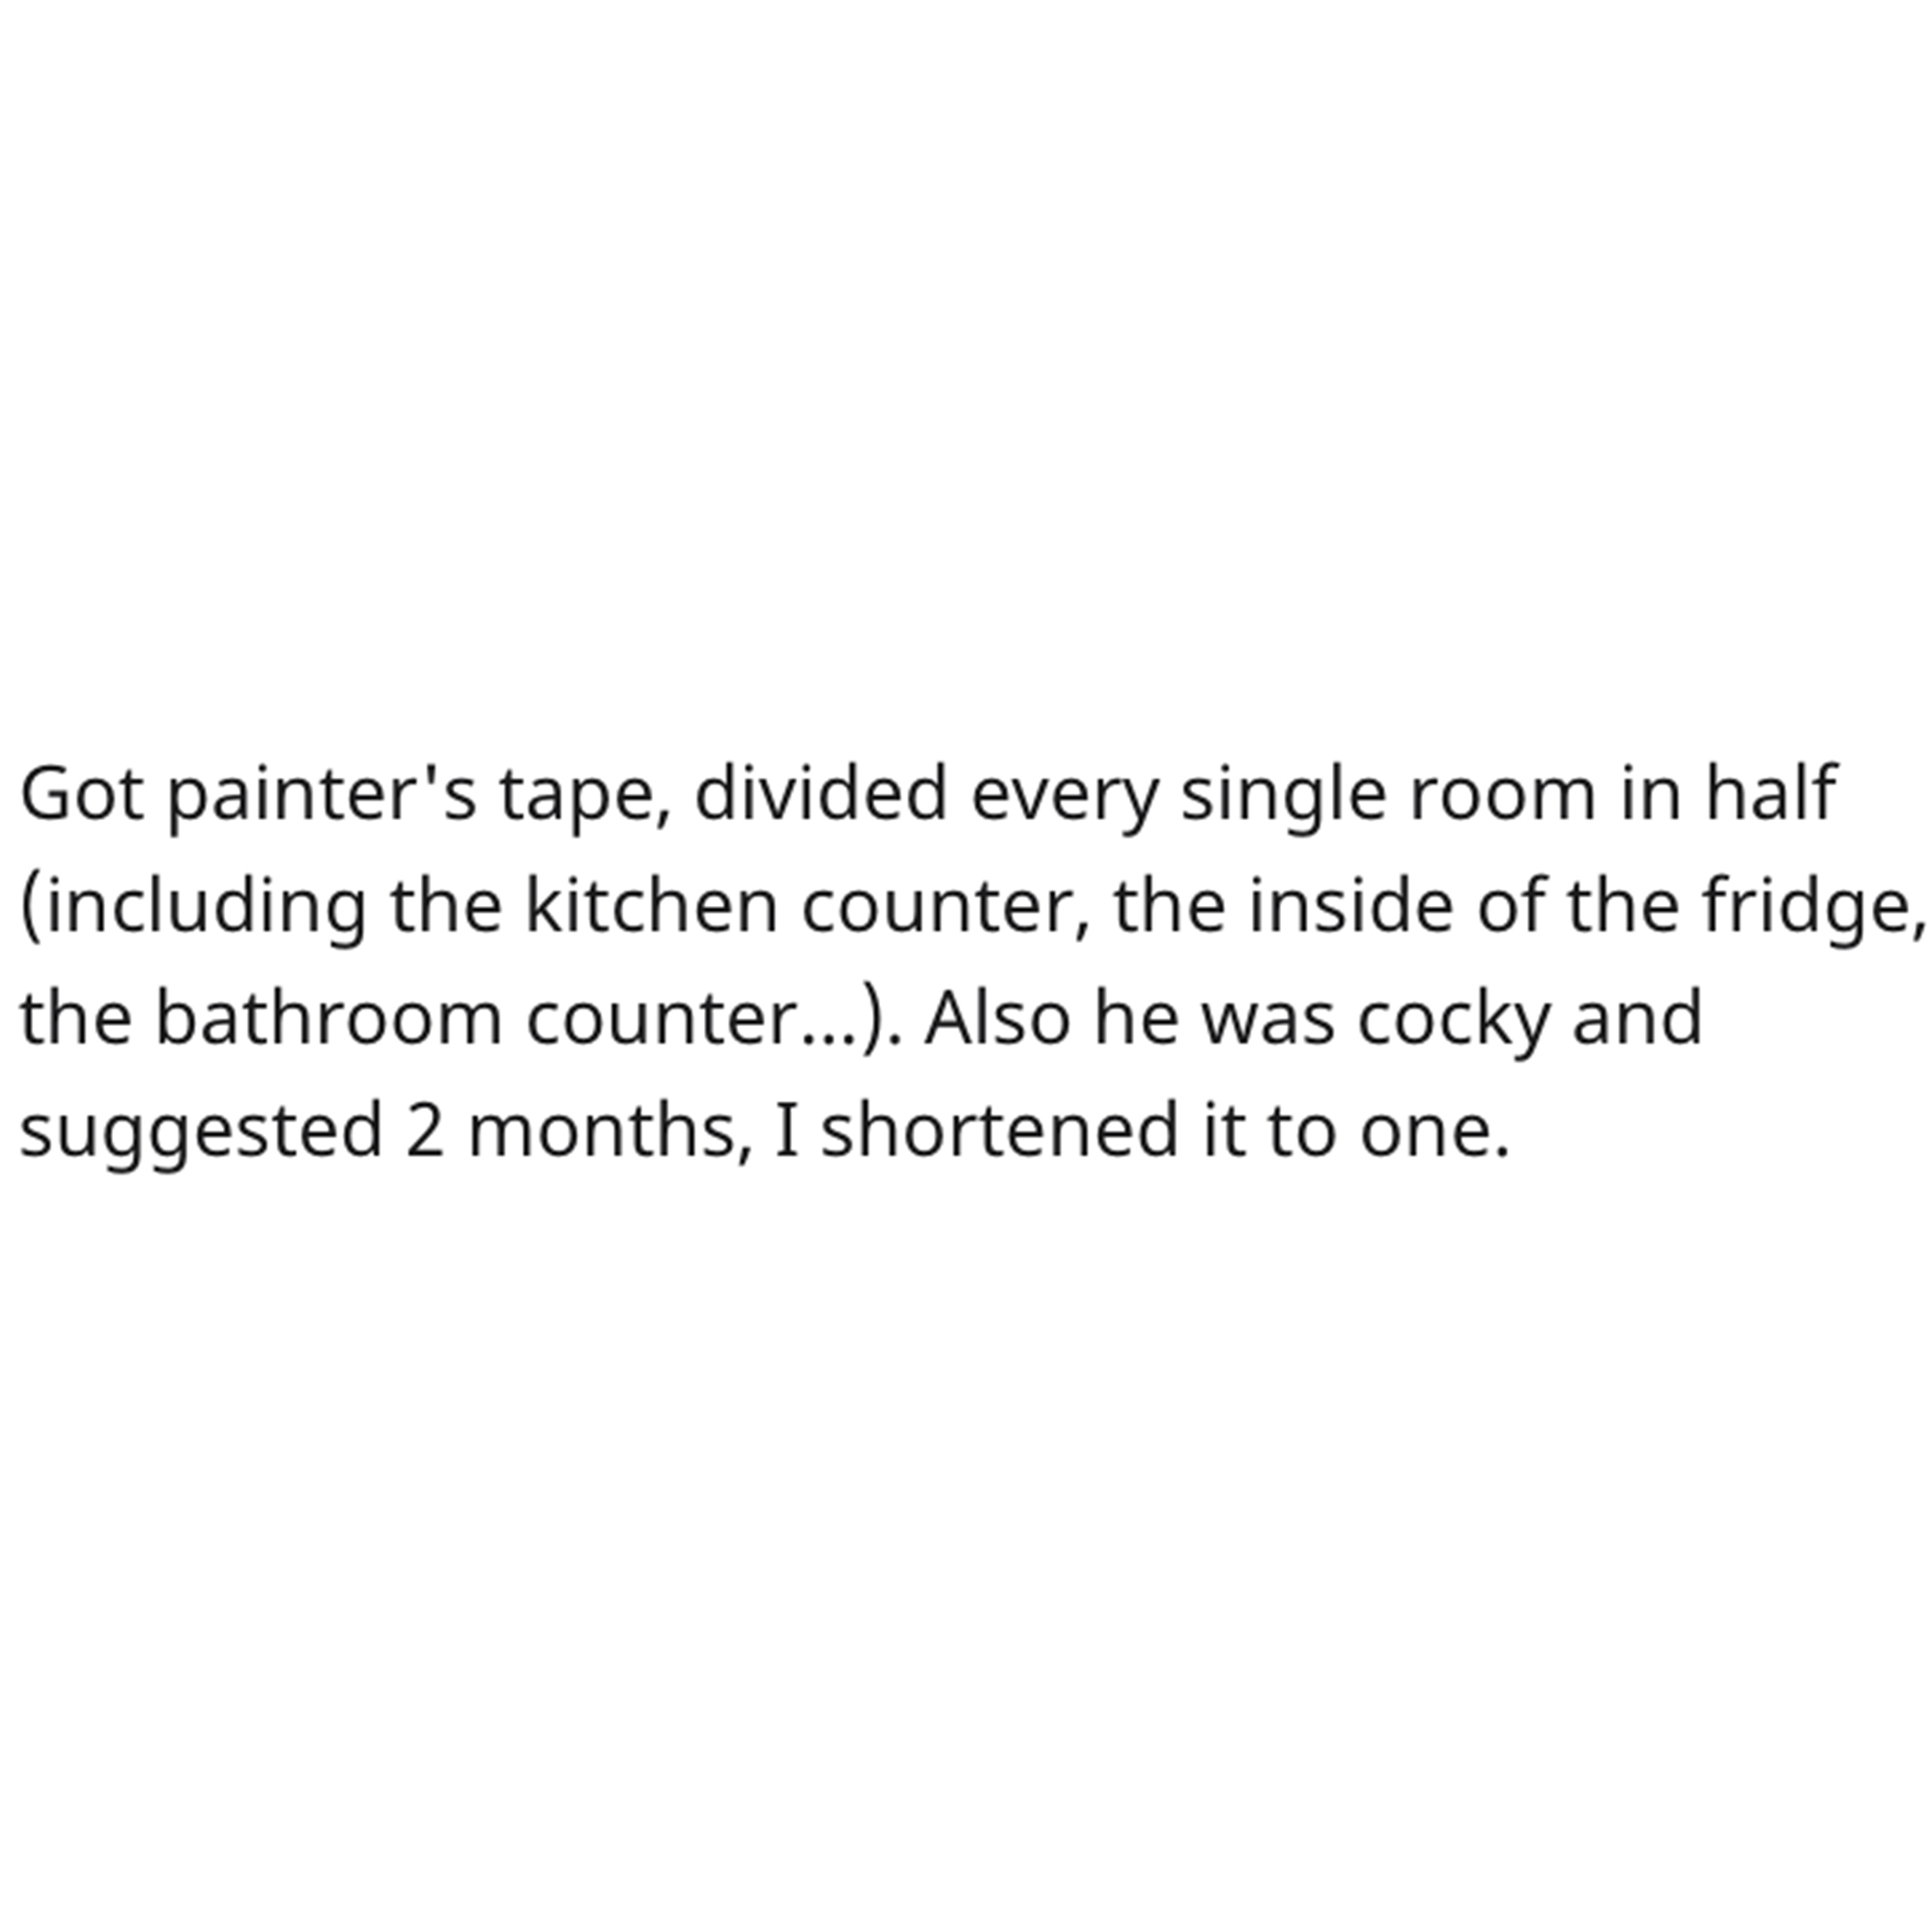 Cleaning Contest Reddit Story - sad quotes about anxiety and depression - Got painter's tape, divided every single room in half including the kitchen counter, the inside of the fridge, the bathroom counter.... Also he was cocky and suggested 2 months, I s